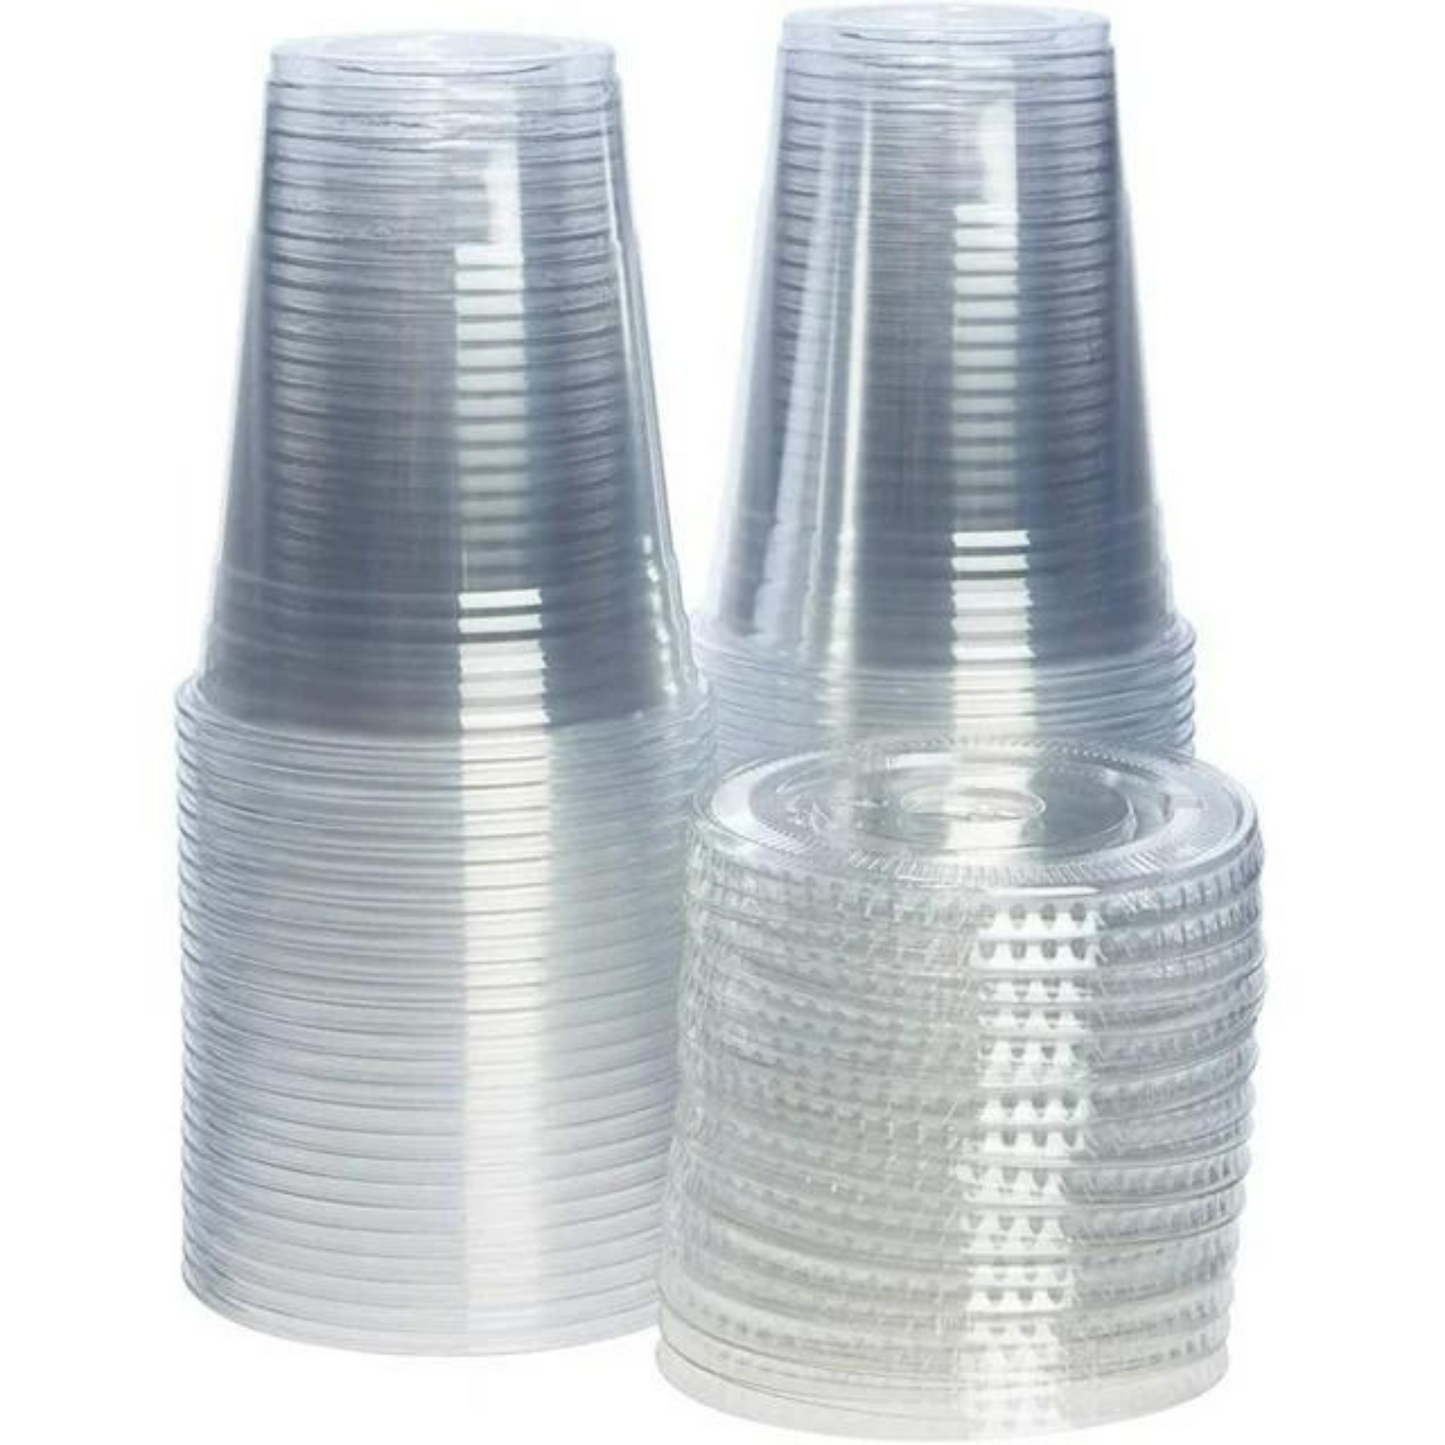 16oz Plastic Clear PET Cups With Flat Lid & Straw, for All Kinds of Beverages Smoothie Cups VeZee Cups With Flat Lids 100 Pack 